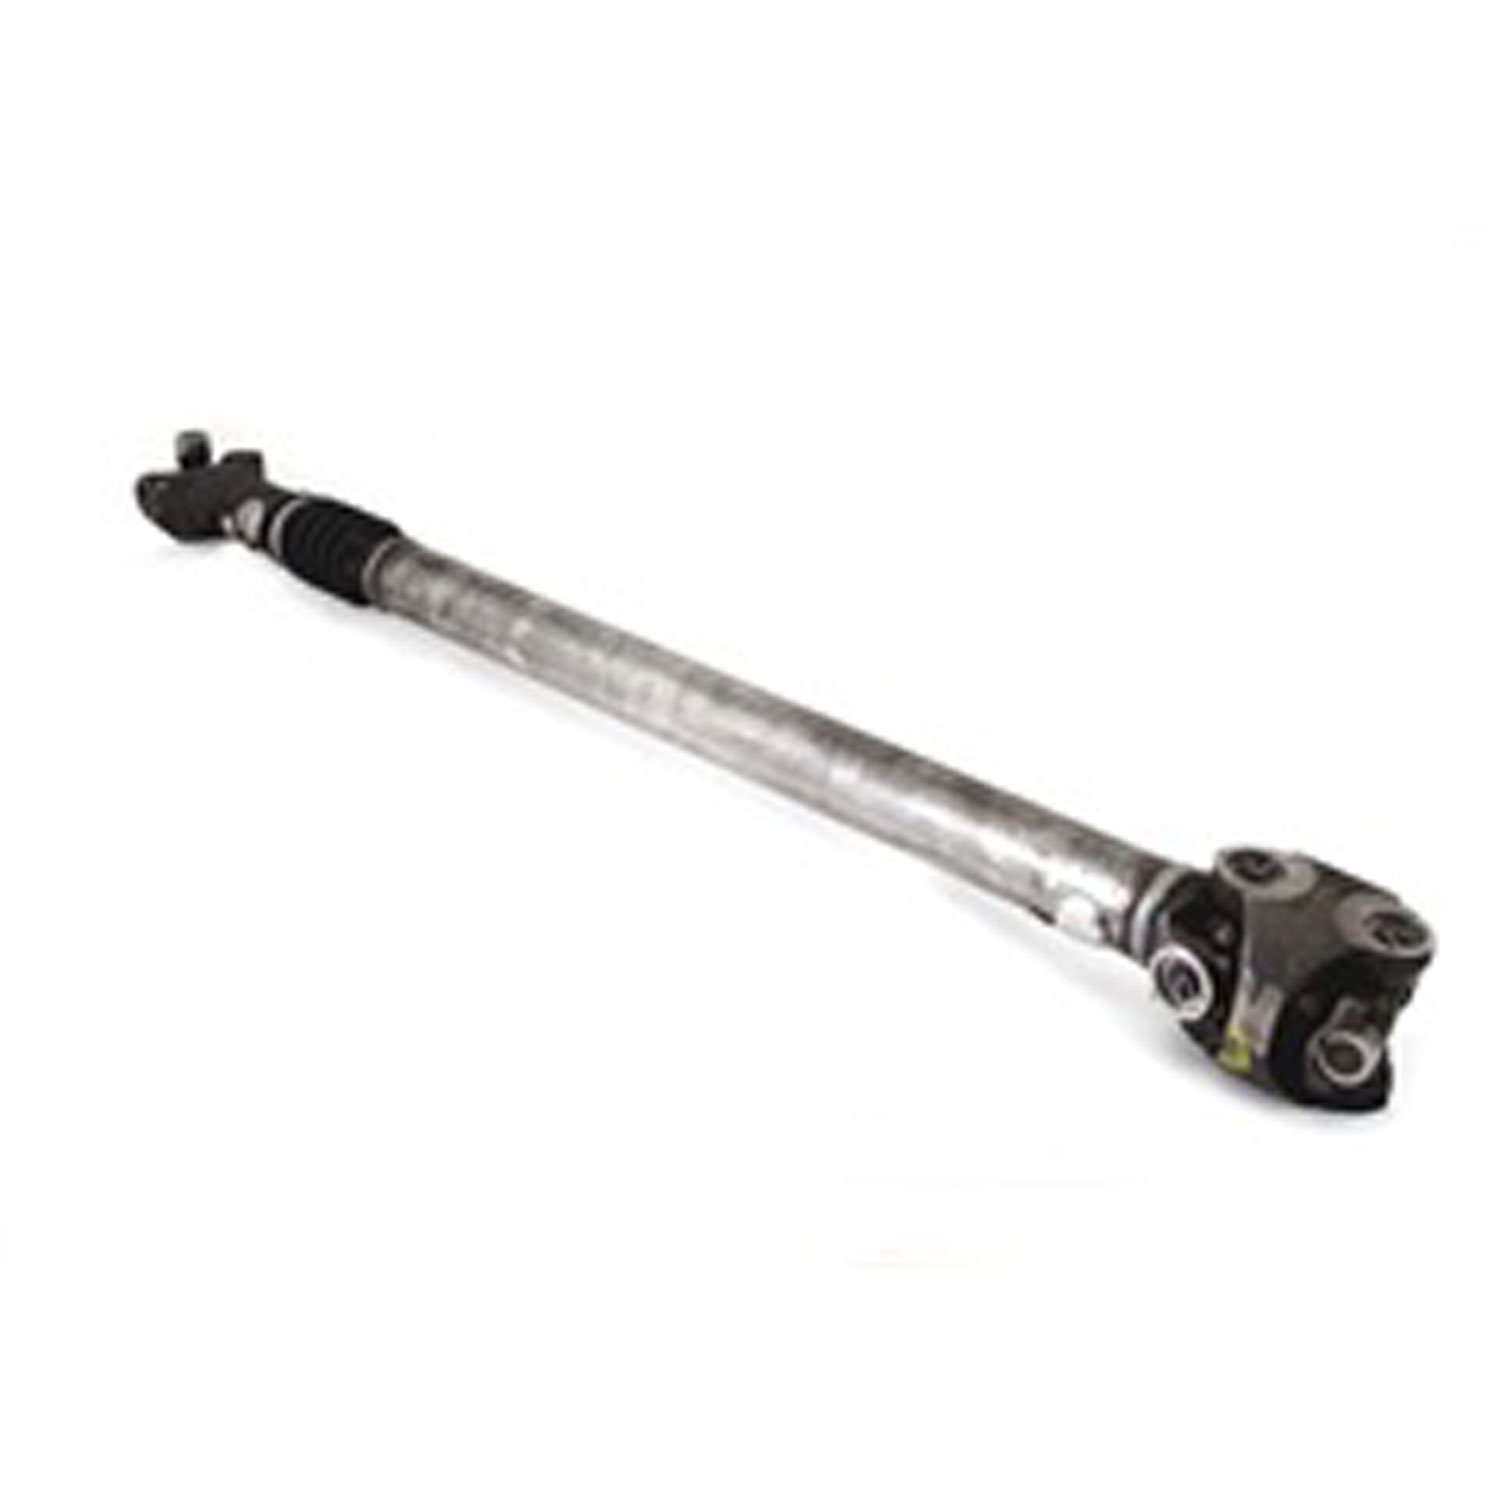 Stock replacement front driveshaft from Omix-ADA, Fits 03-06 Jeep Wrangler TJ with 2.4 liter